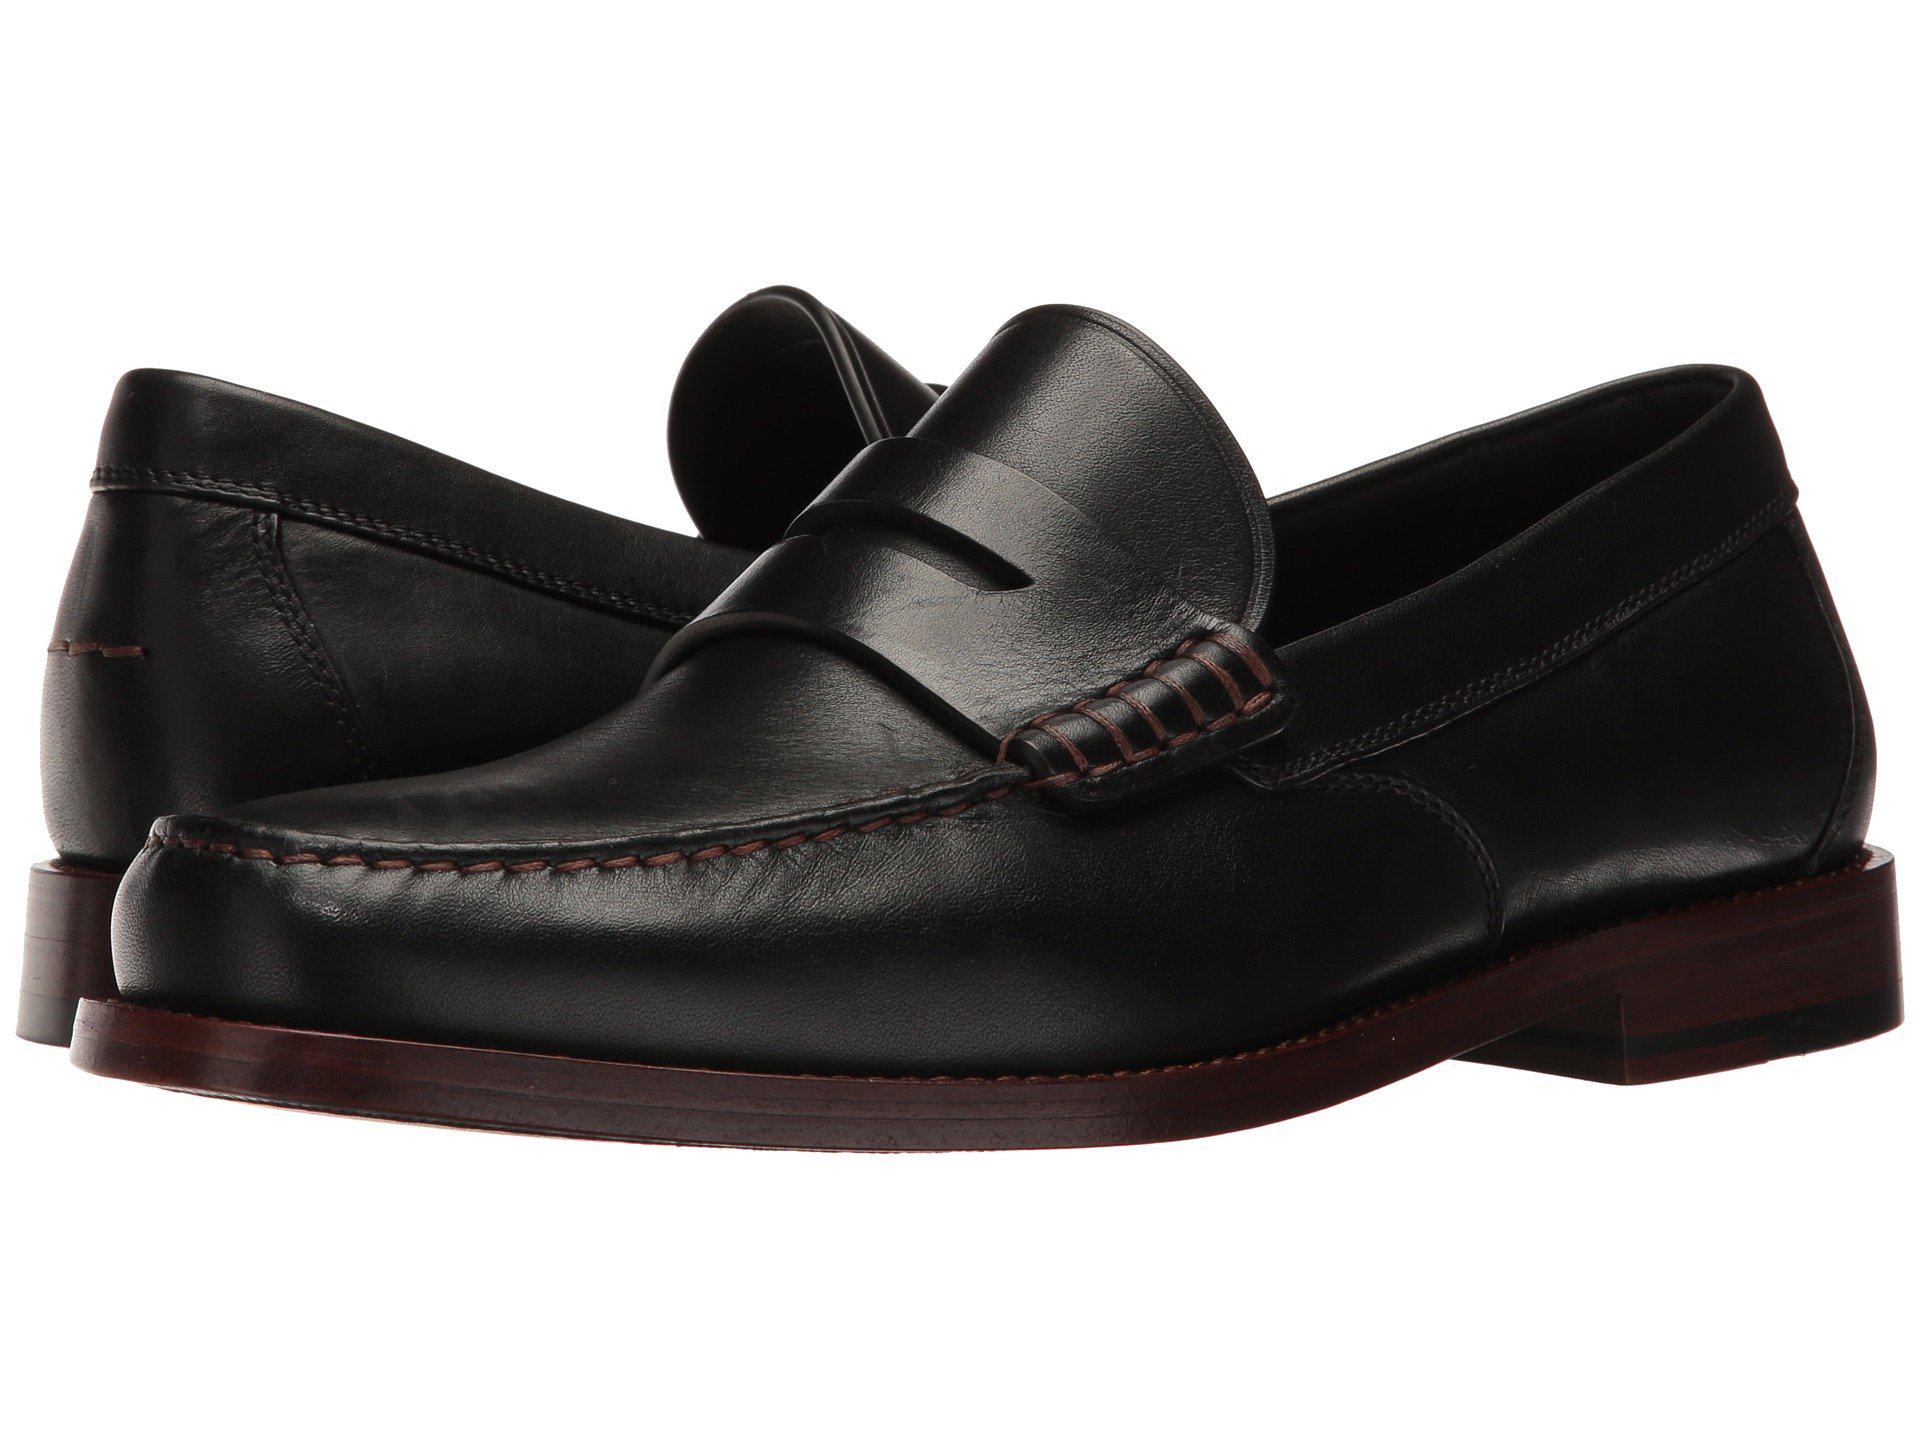 Lyst - Coach Manhattan Leather Loafer (black) Men's Slip On Shoes in ...